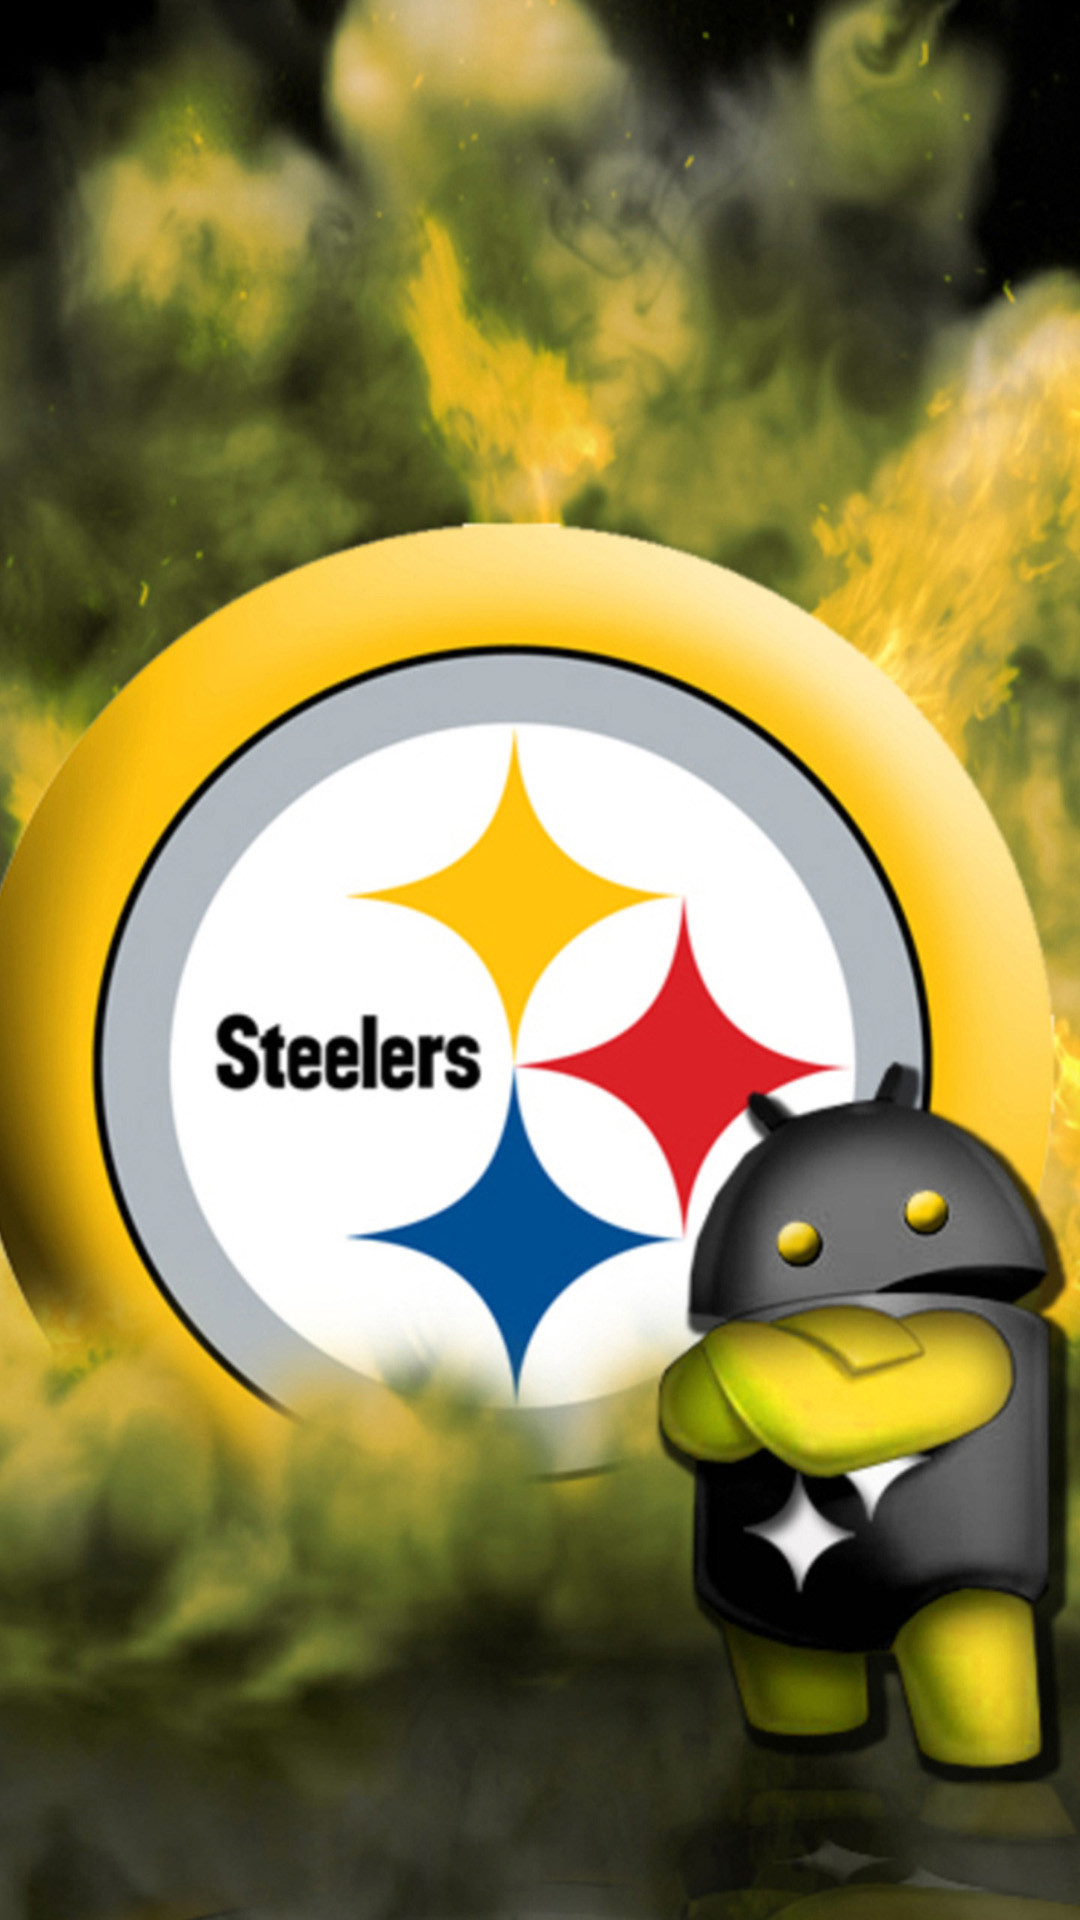 1080x1920 Android Steelers Galaxy S5 Wallpapers HD.jpg